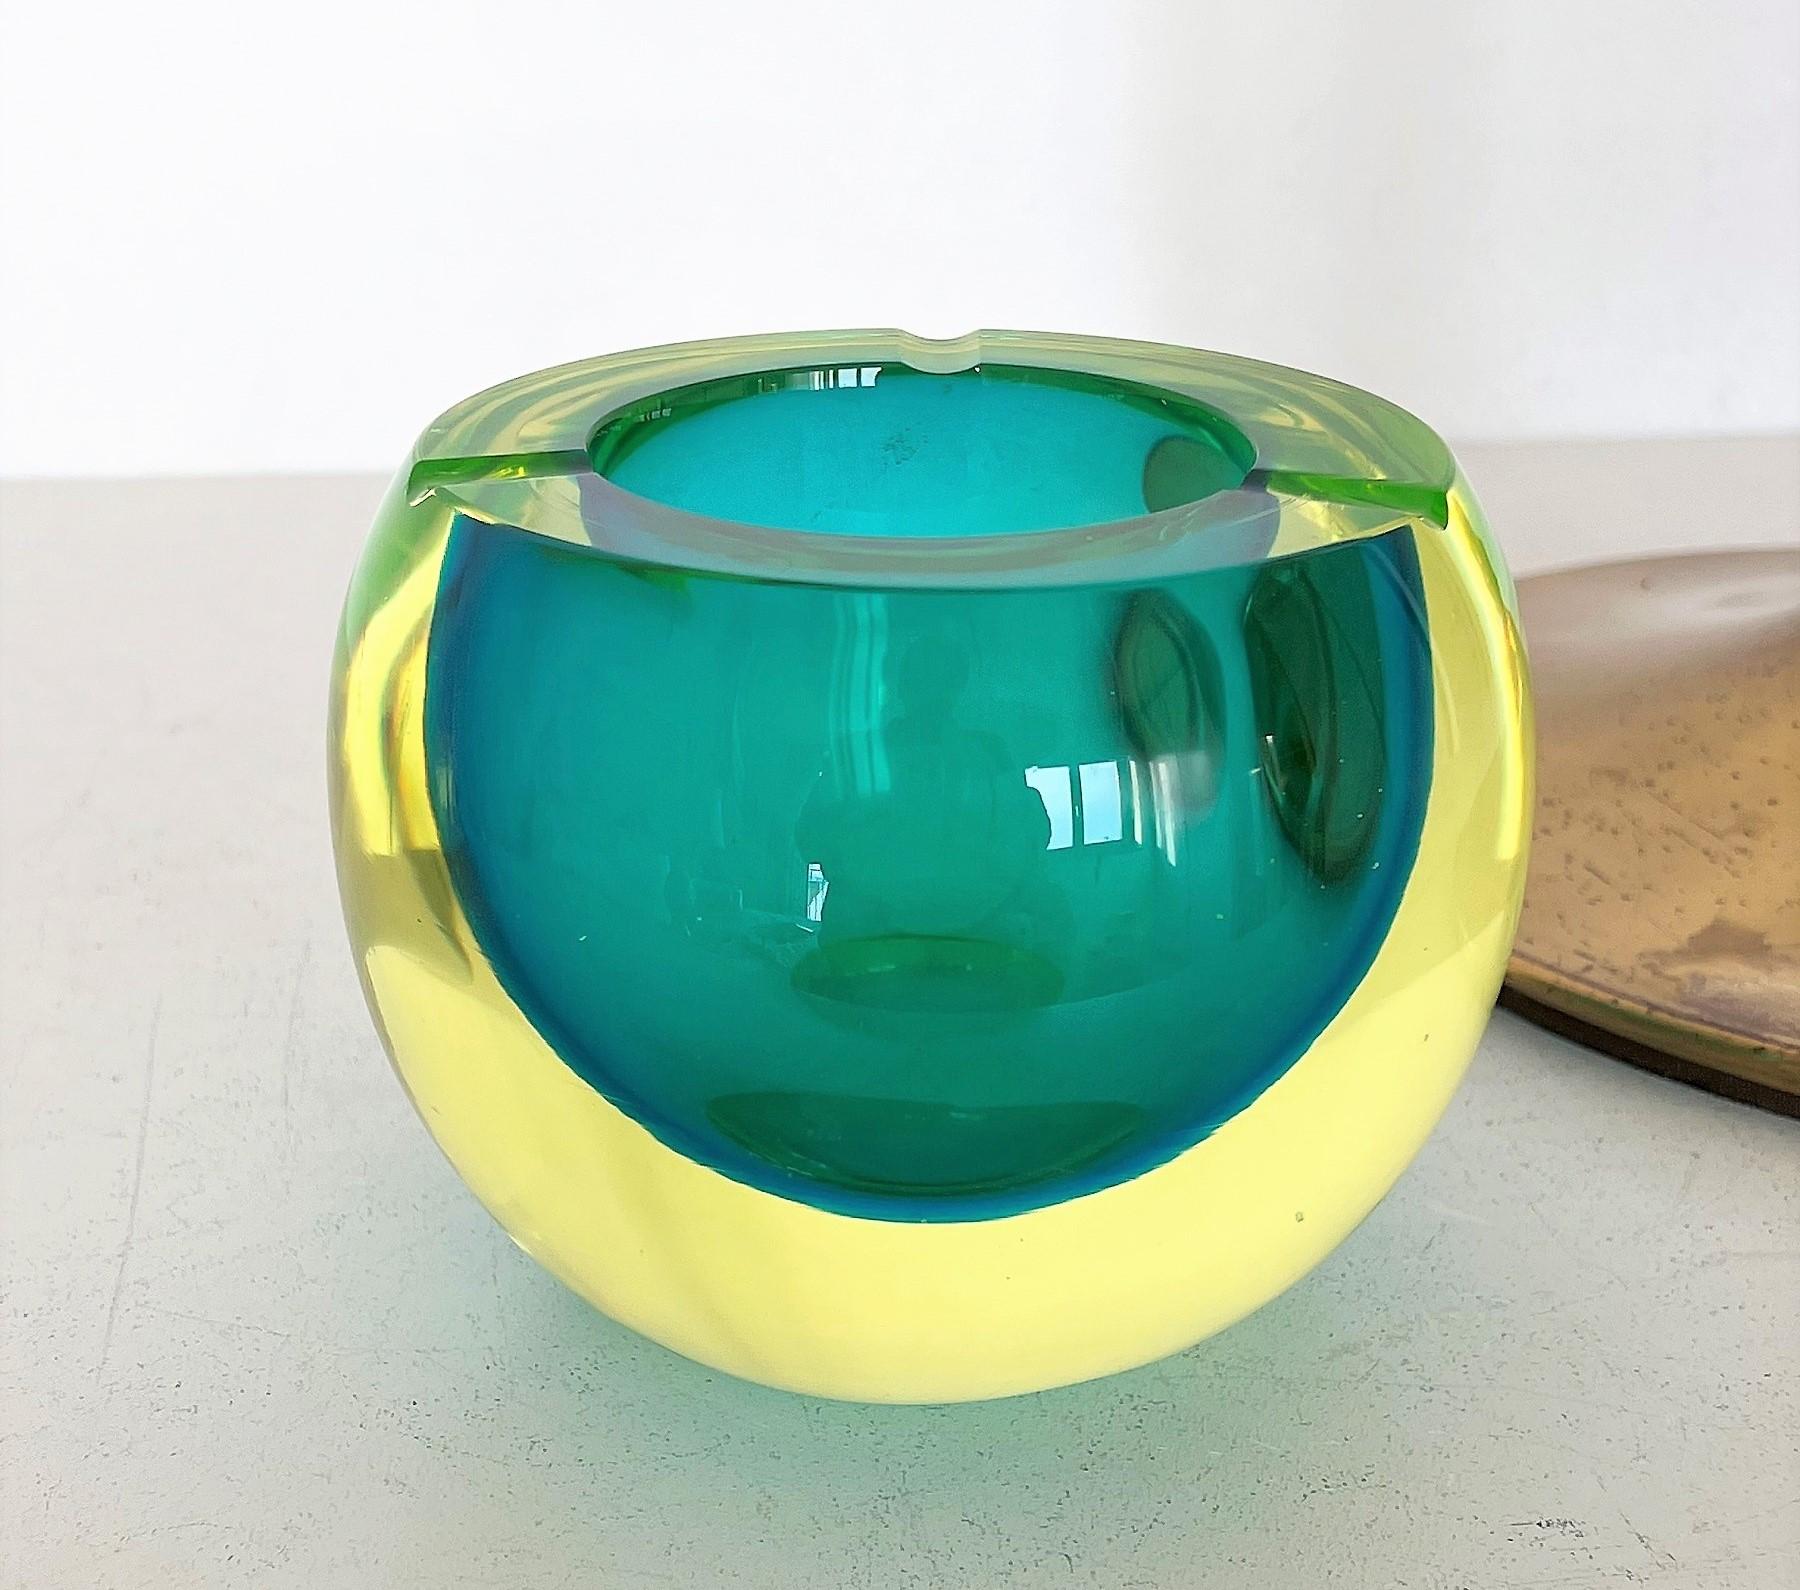 Gorgeous floor standing Ashtray made of strong heavy Brass Base and beautiful Murano sommerso Glass Bowl. 
The hand-crafted Murano bowl is made of different submerged green shiny colors, typically for Murano glass quality. 
Depending on the light,